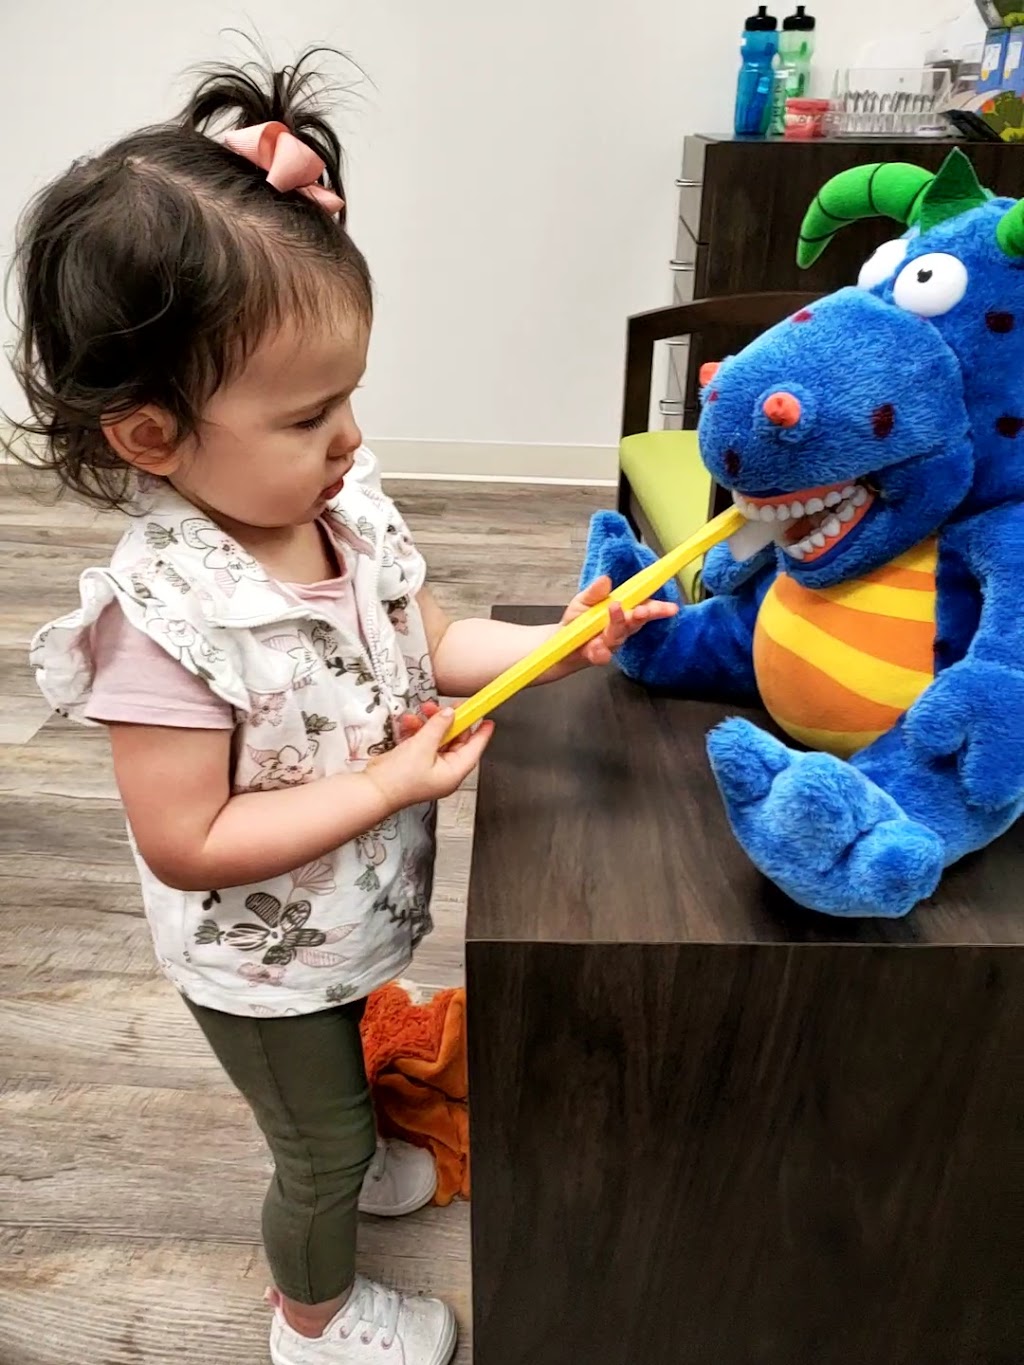 Kidzania Pediatric Dentistry and Orthodontics Forney | 132 Kroger Dr Suite 300, Forney, TX 75126, USA | Phone: (469) 609-2200